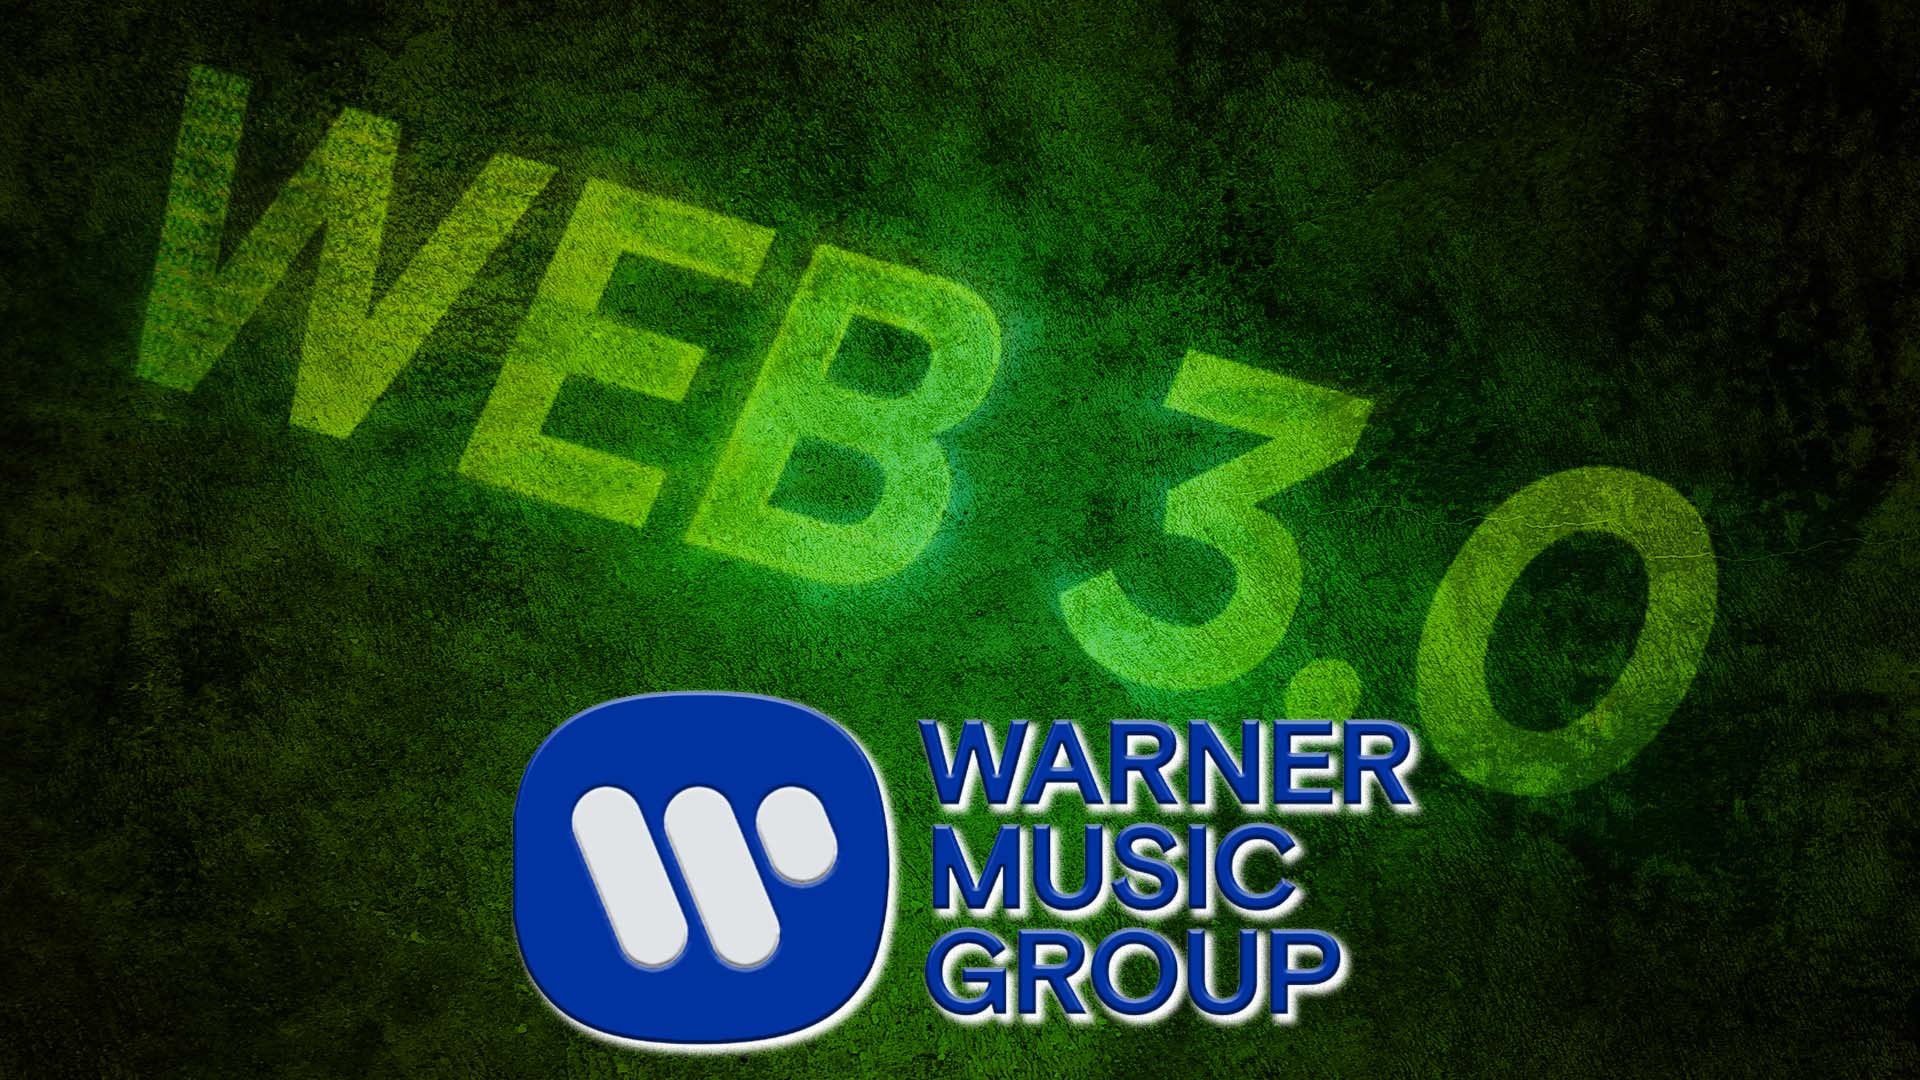 Warner Music Exec. Says Web3 Music Needs New Ideas To Succeed